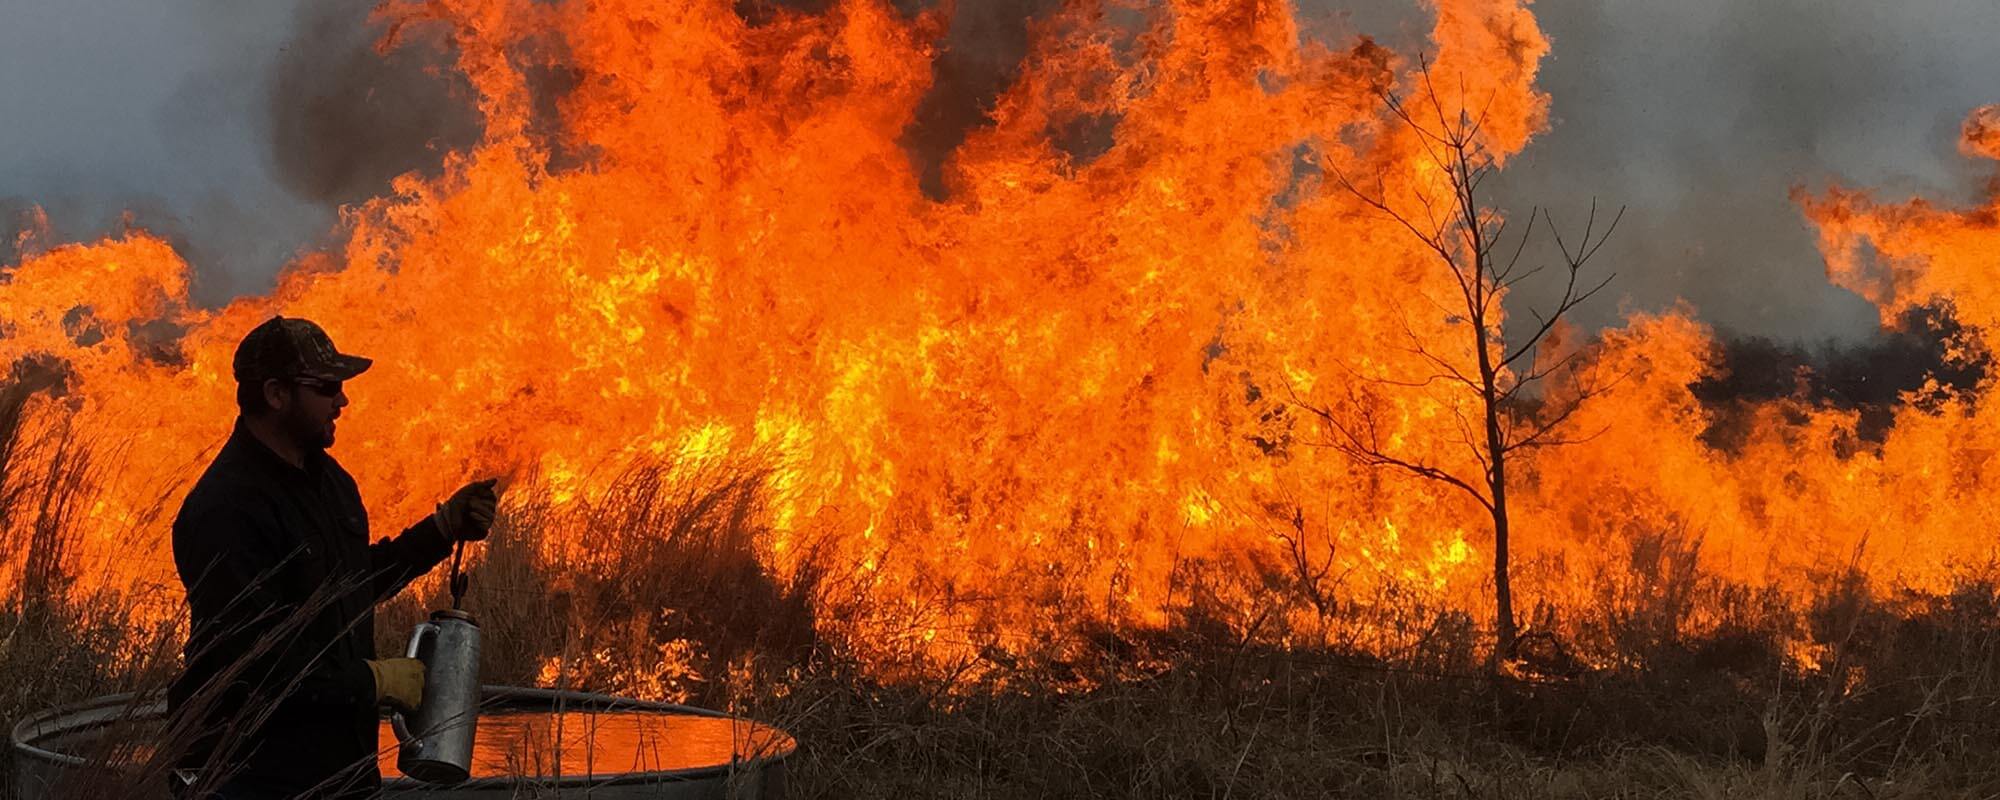 man standing by burning field